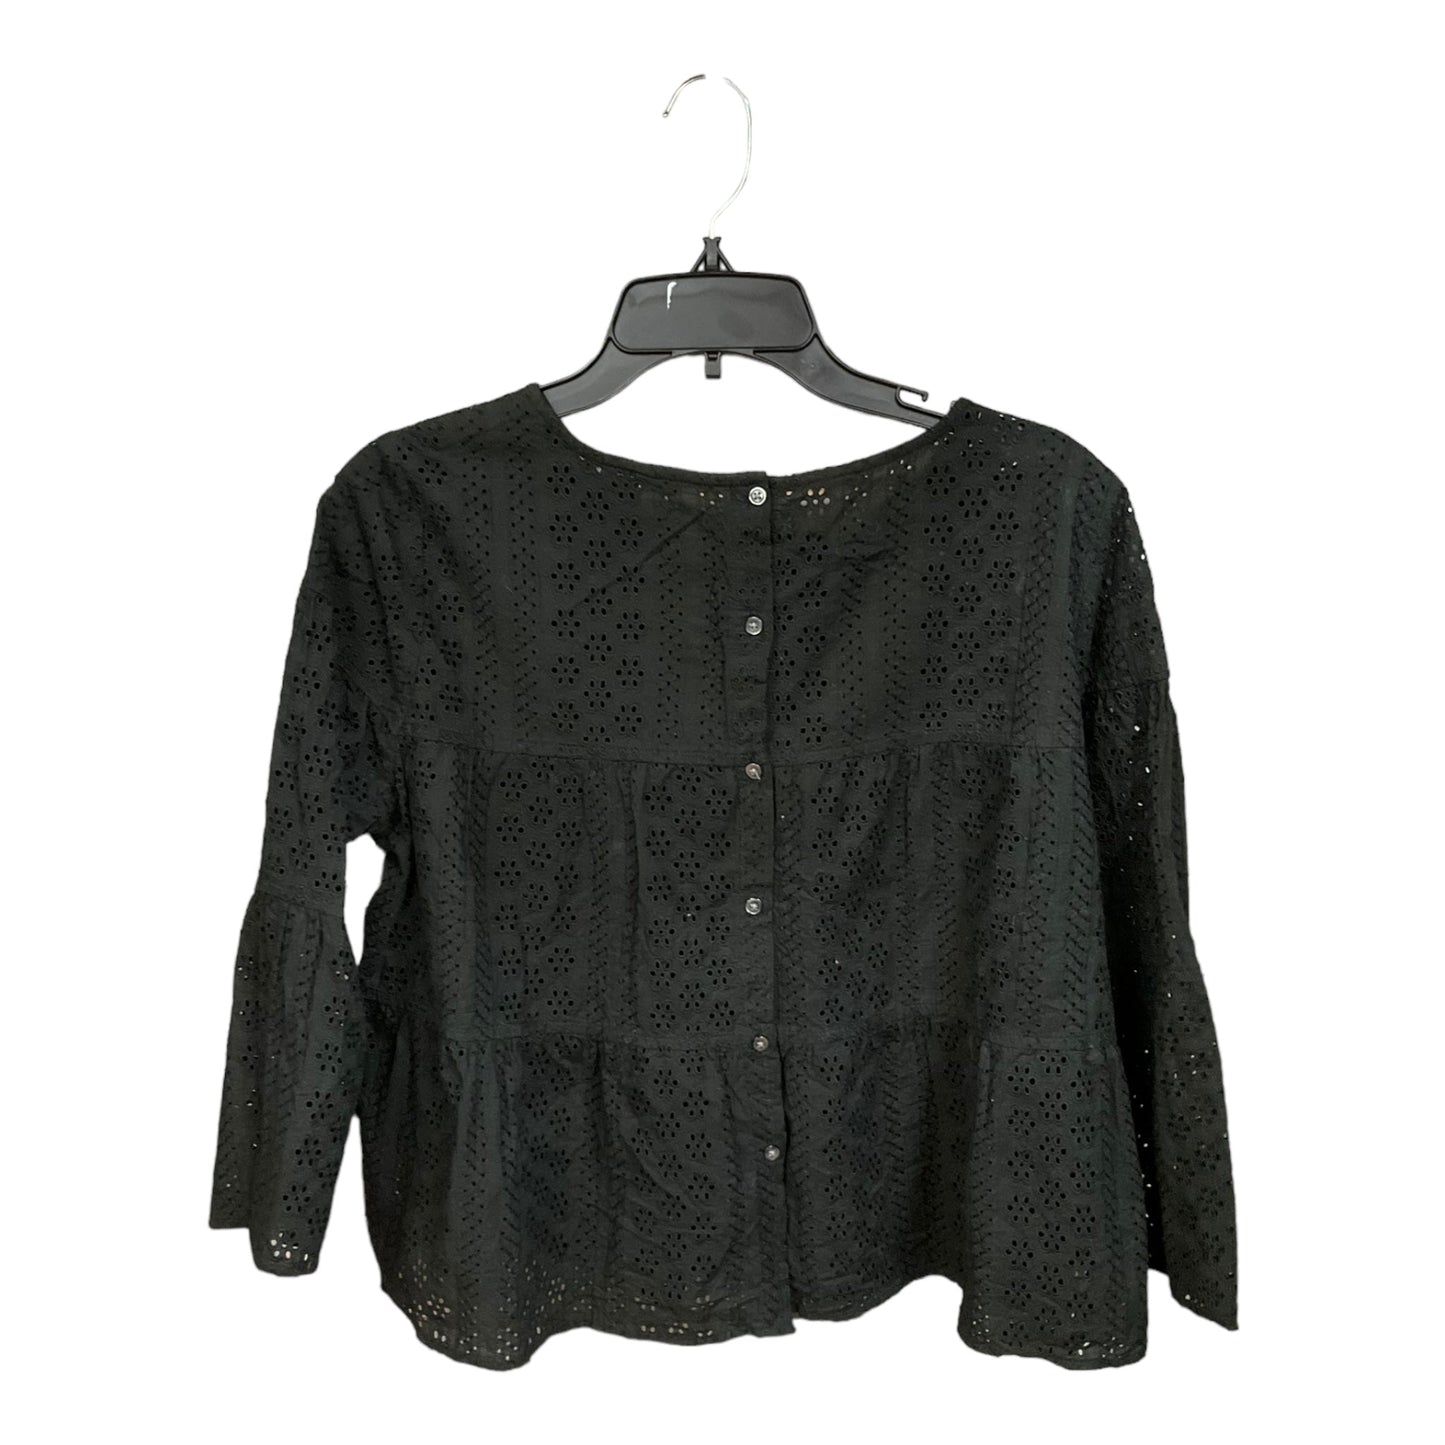 Black Top 3/4 Sleeve Madewell, Size L